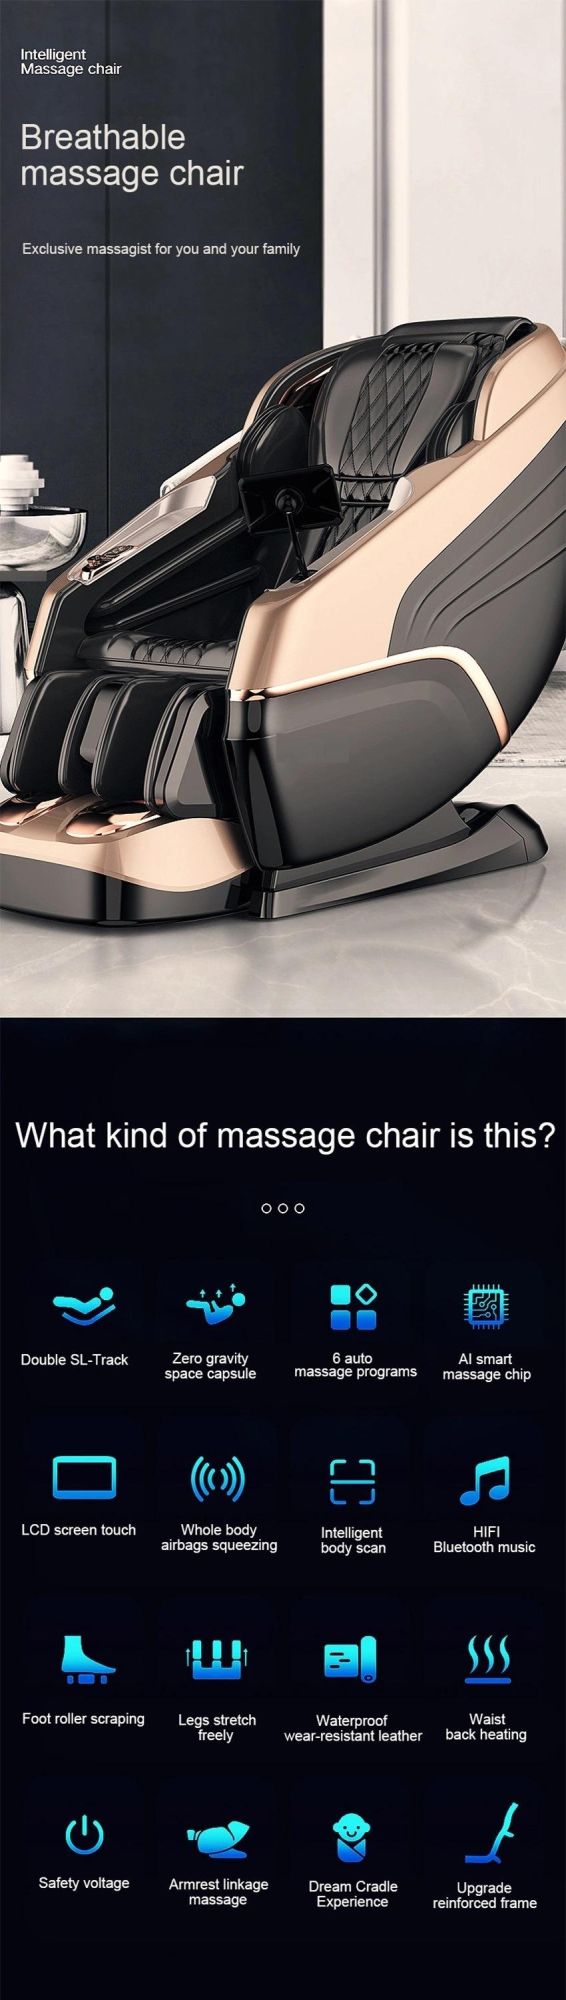 Sauron 888 Amazon Best Selling Auto Full Body Detection Massage Chair